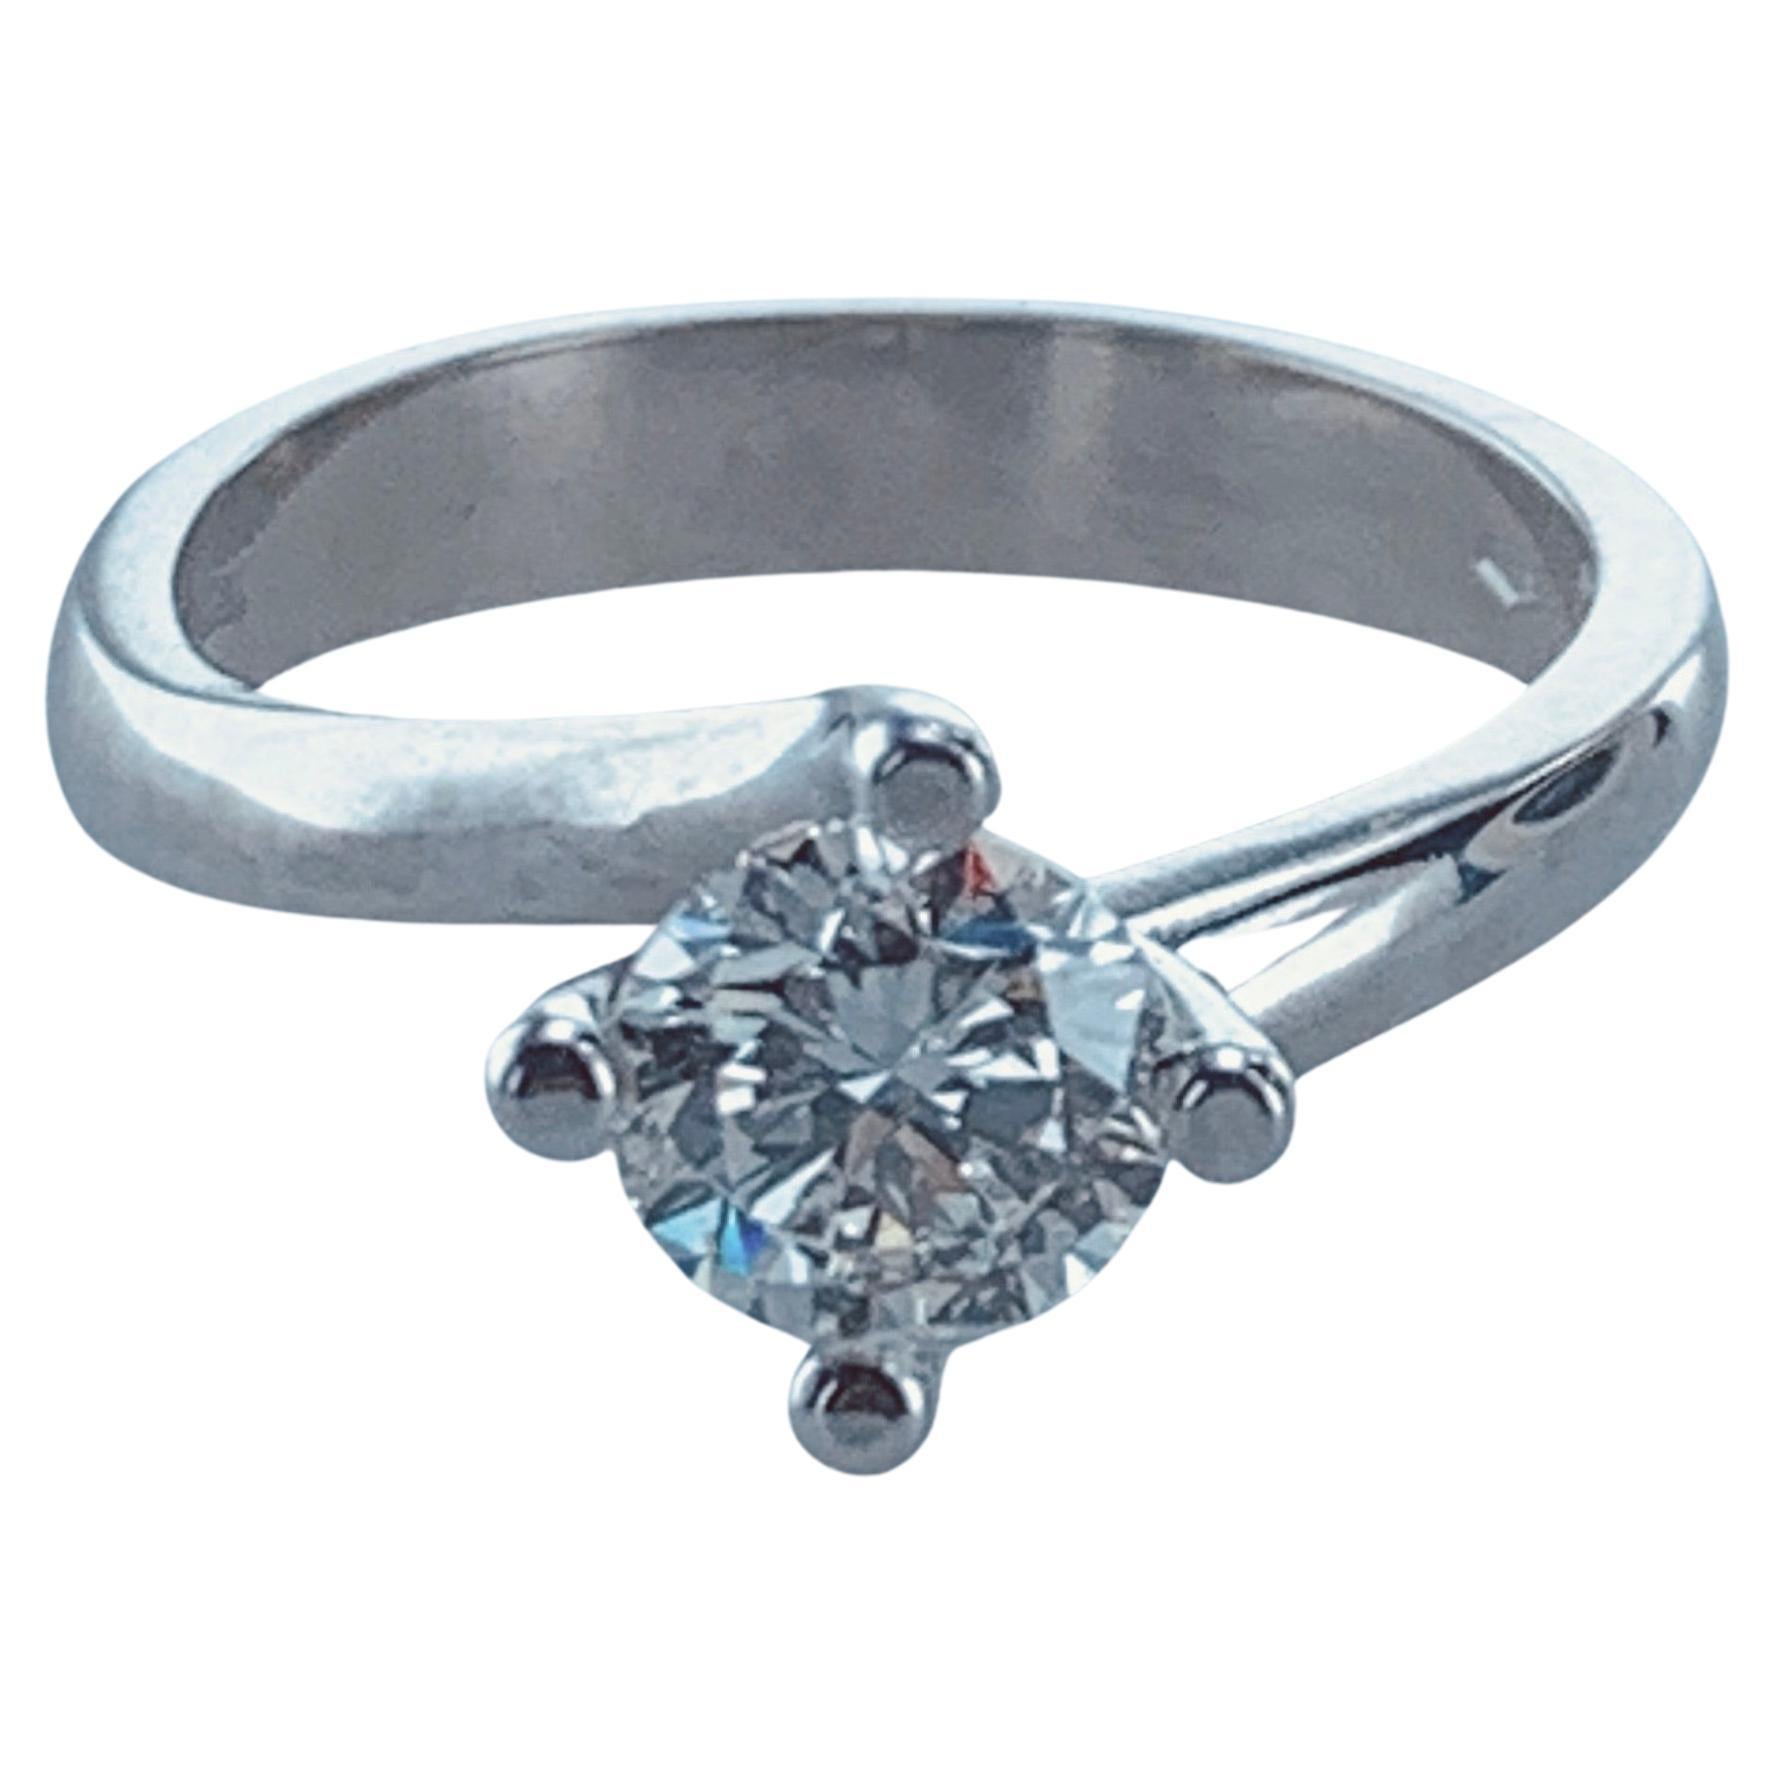 1.01 Carat Round Diamond set in 18Kt White Gold Solitaire Engagement Ring